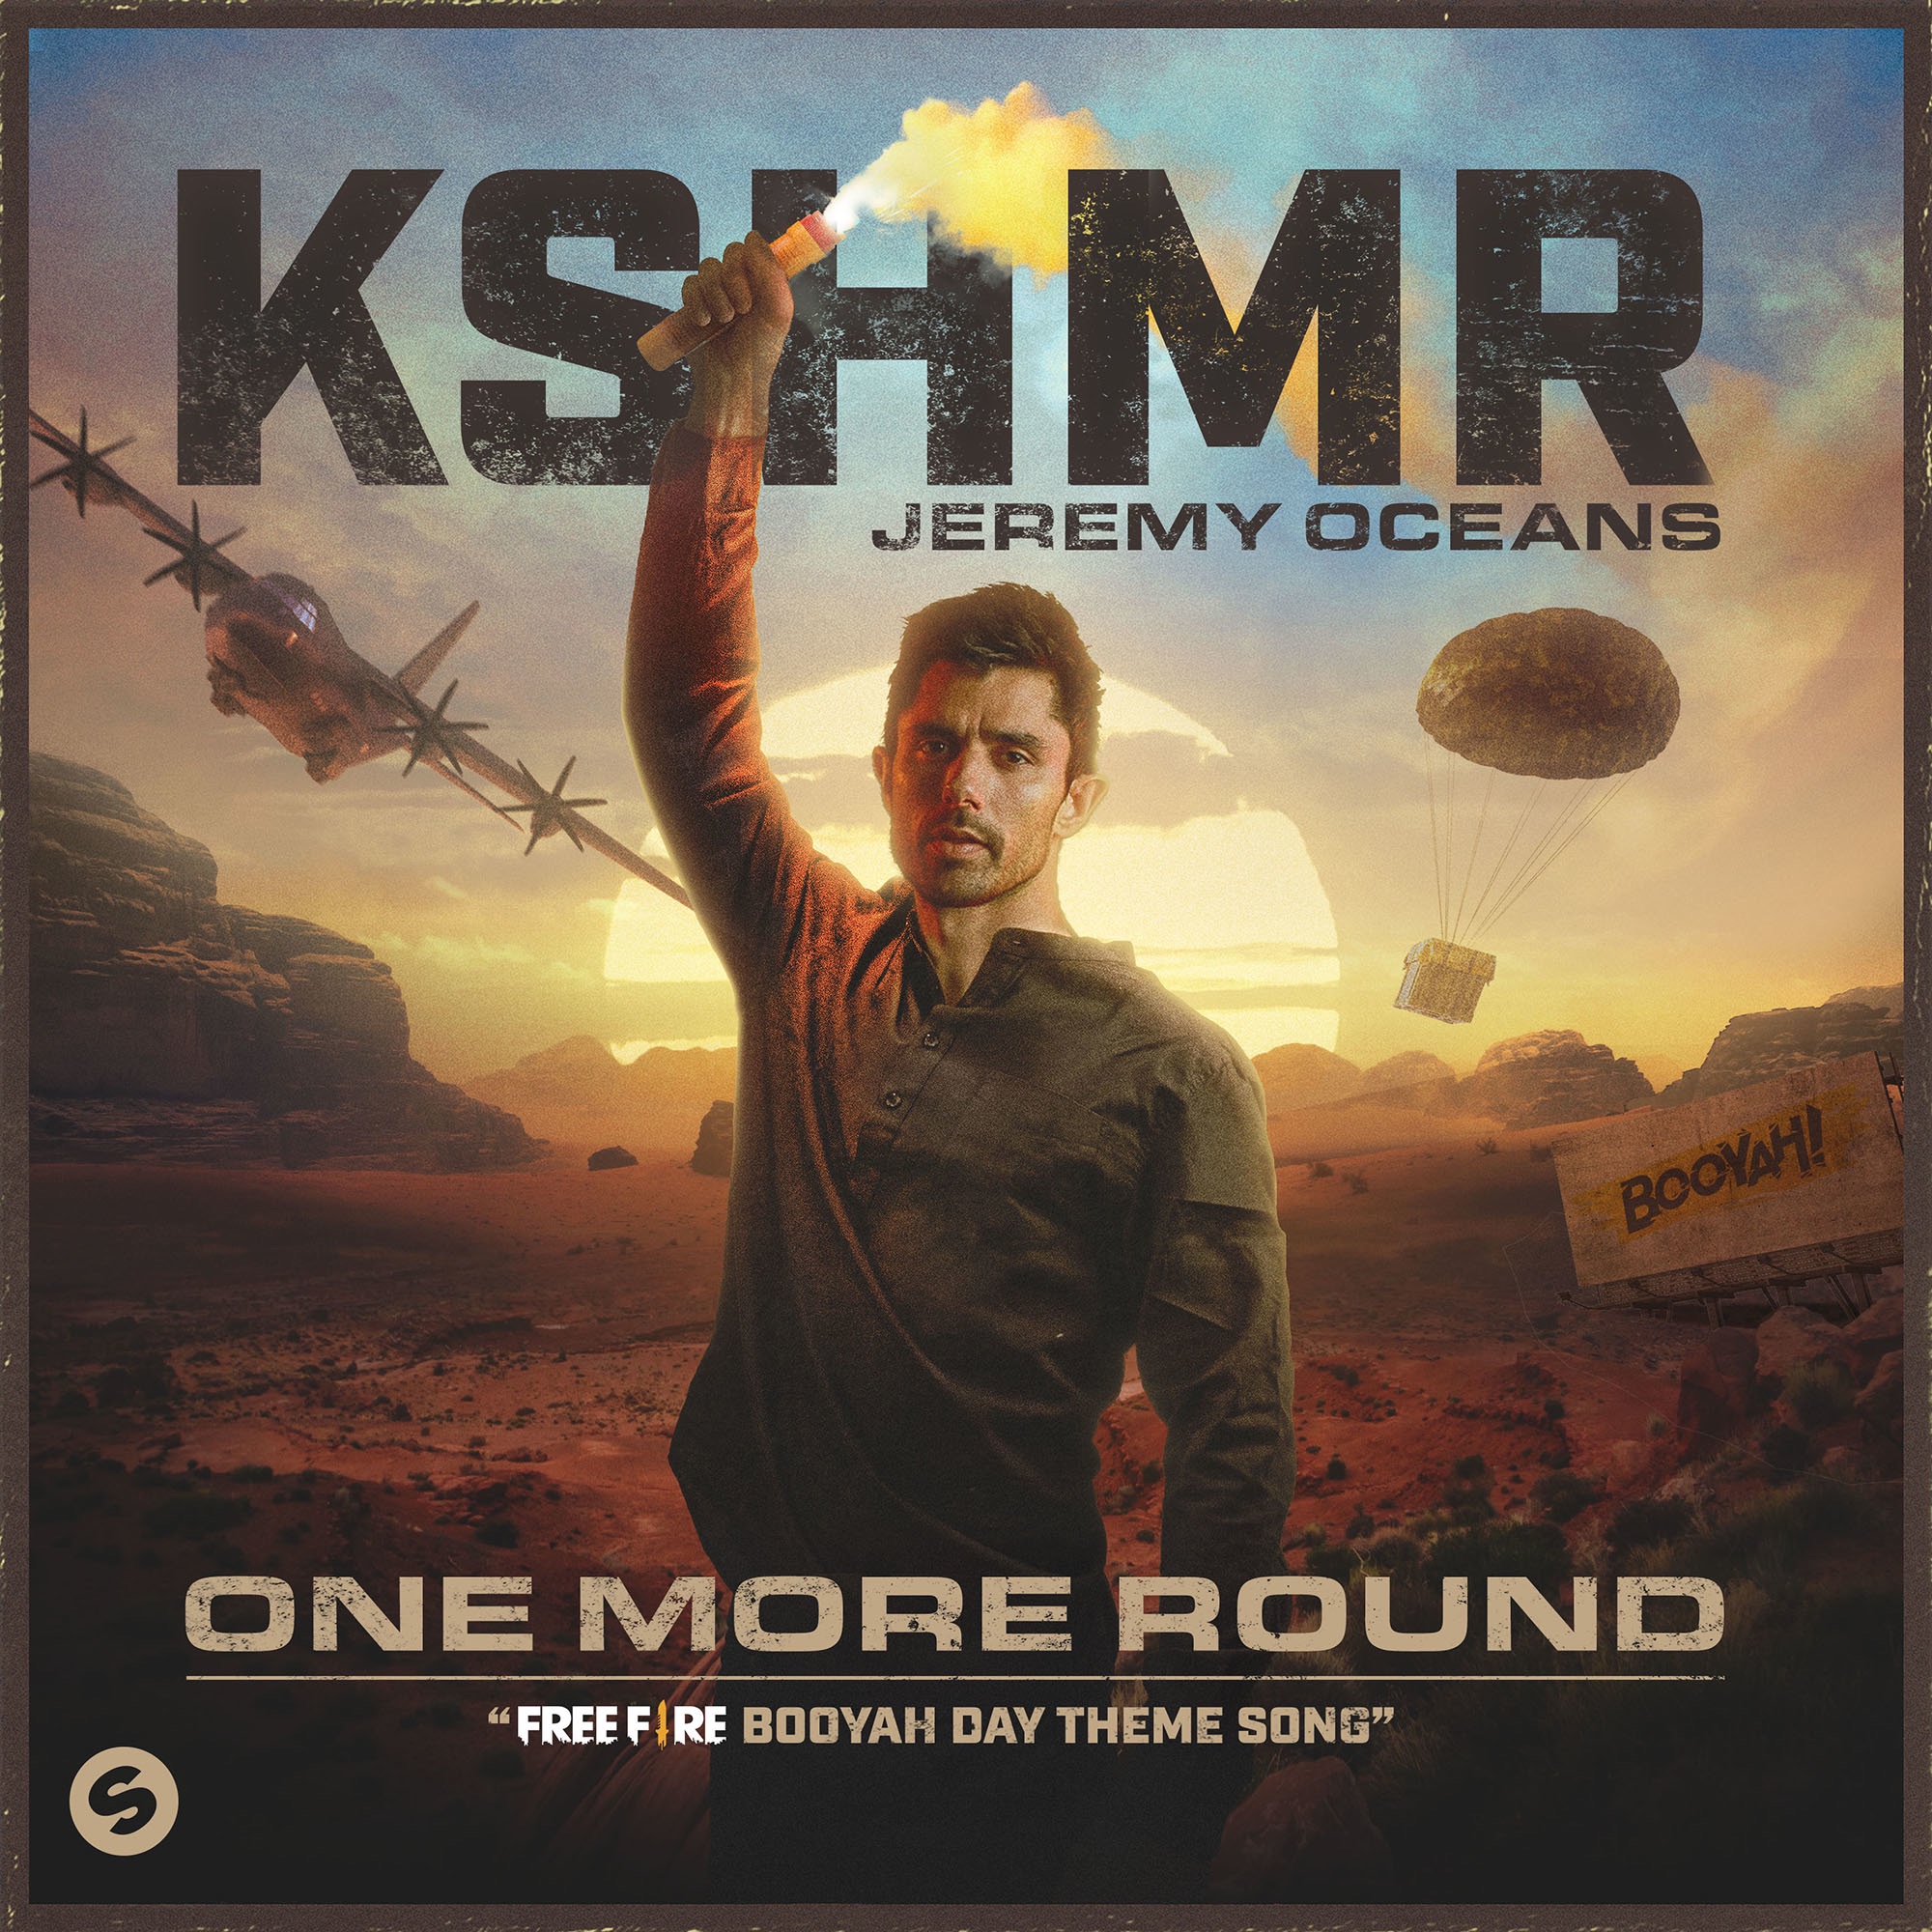 KSHMR & Jeremy Oceans - One More Round (Free Fire Booyah Day Theme Song) - Single